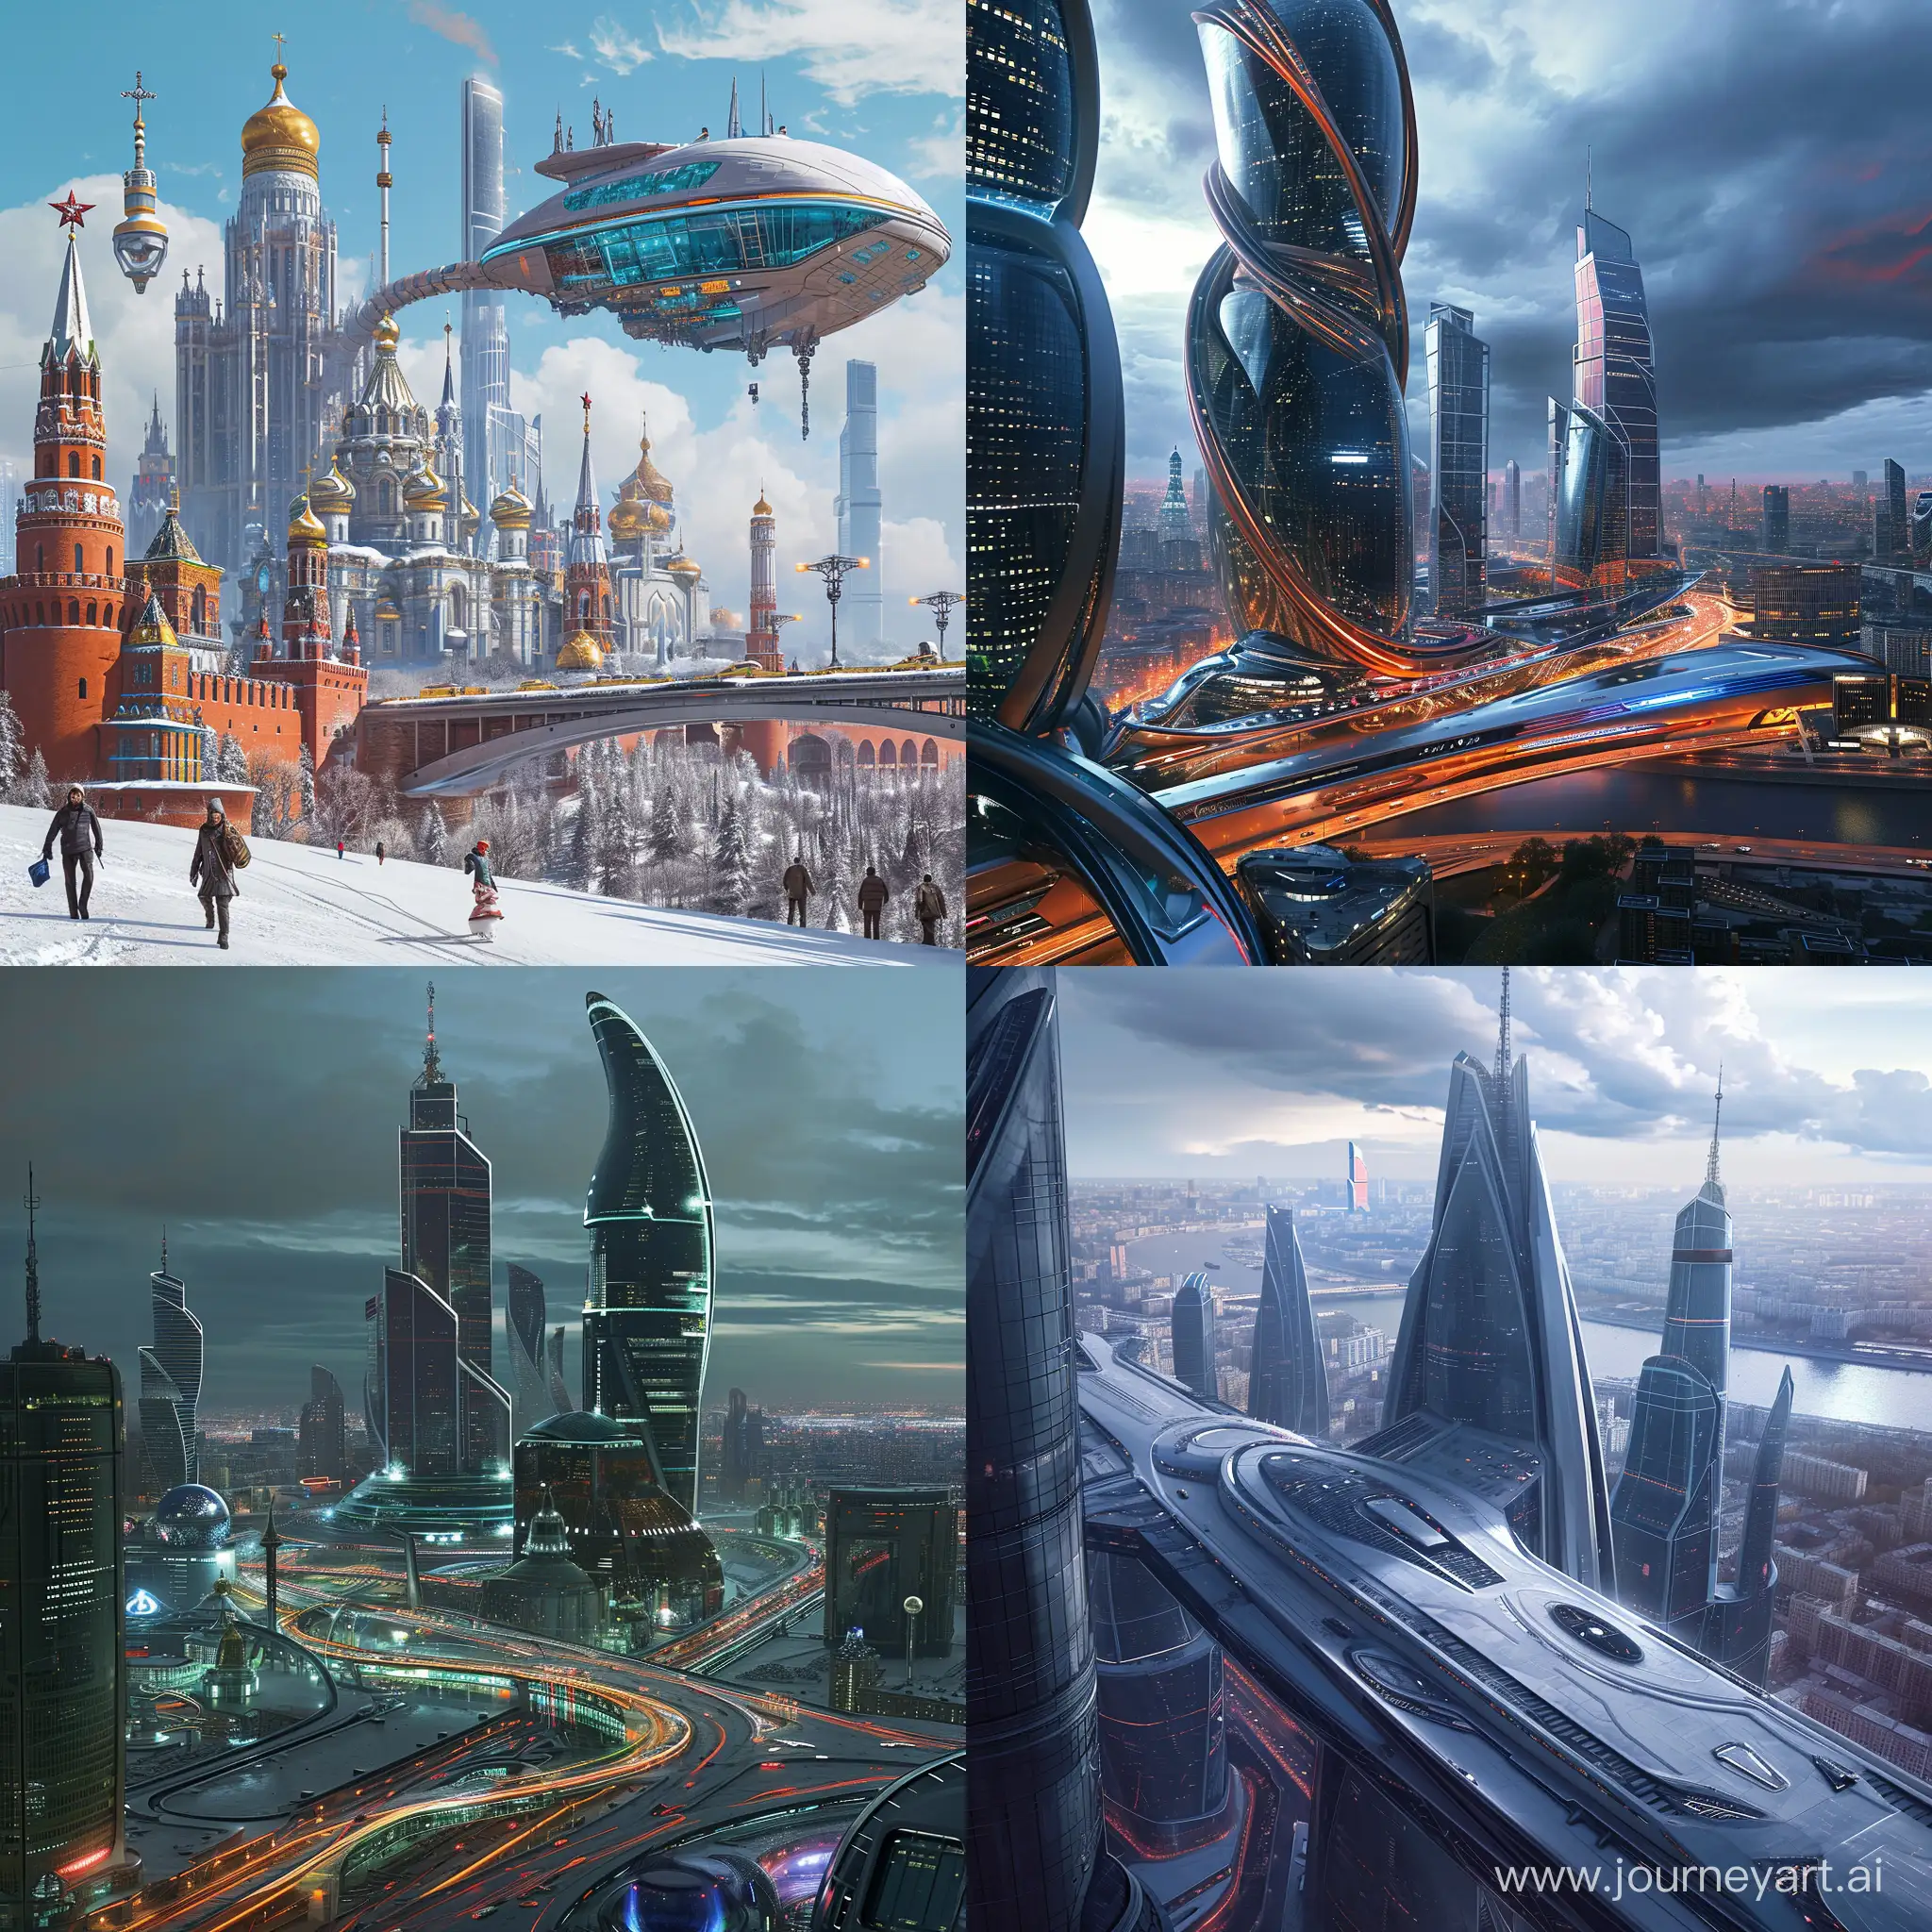 Futuristic-Moscow-HighTech-Cityscape-with-Smart-Materials